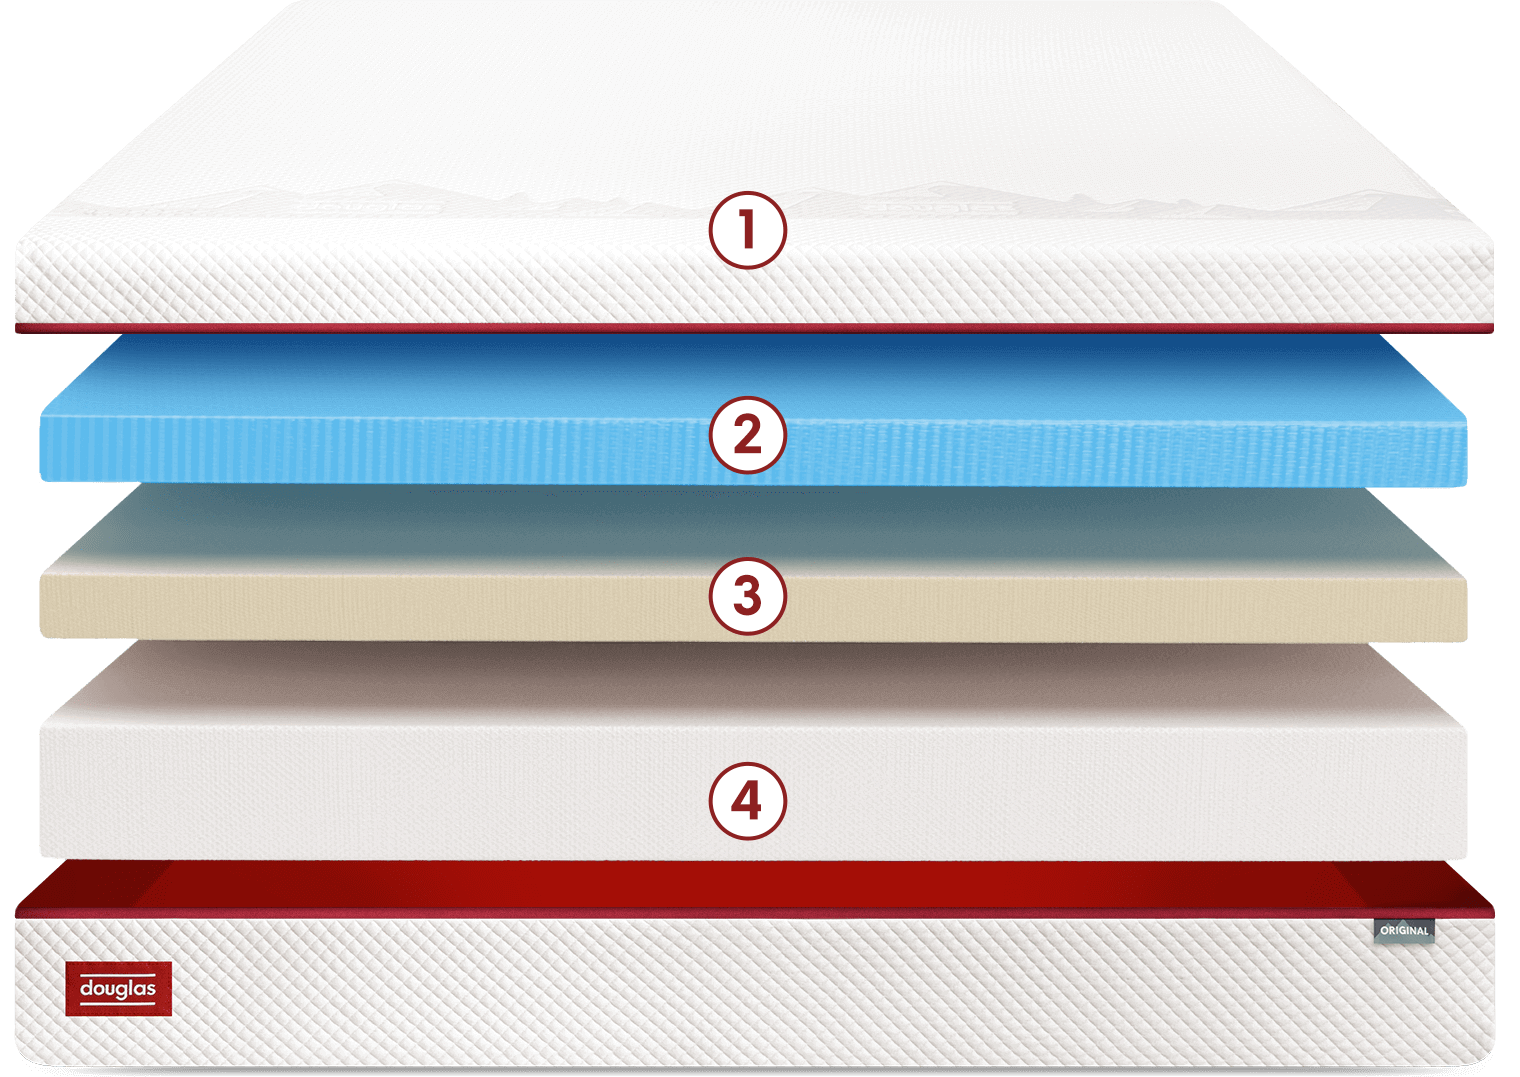 Expanded view of high-quality foam layers in Douglas mattress